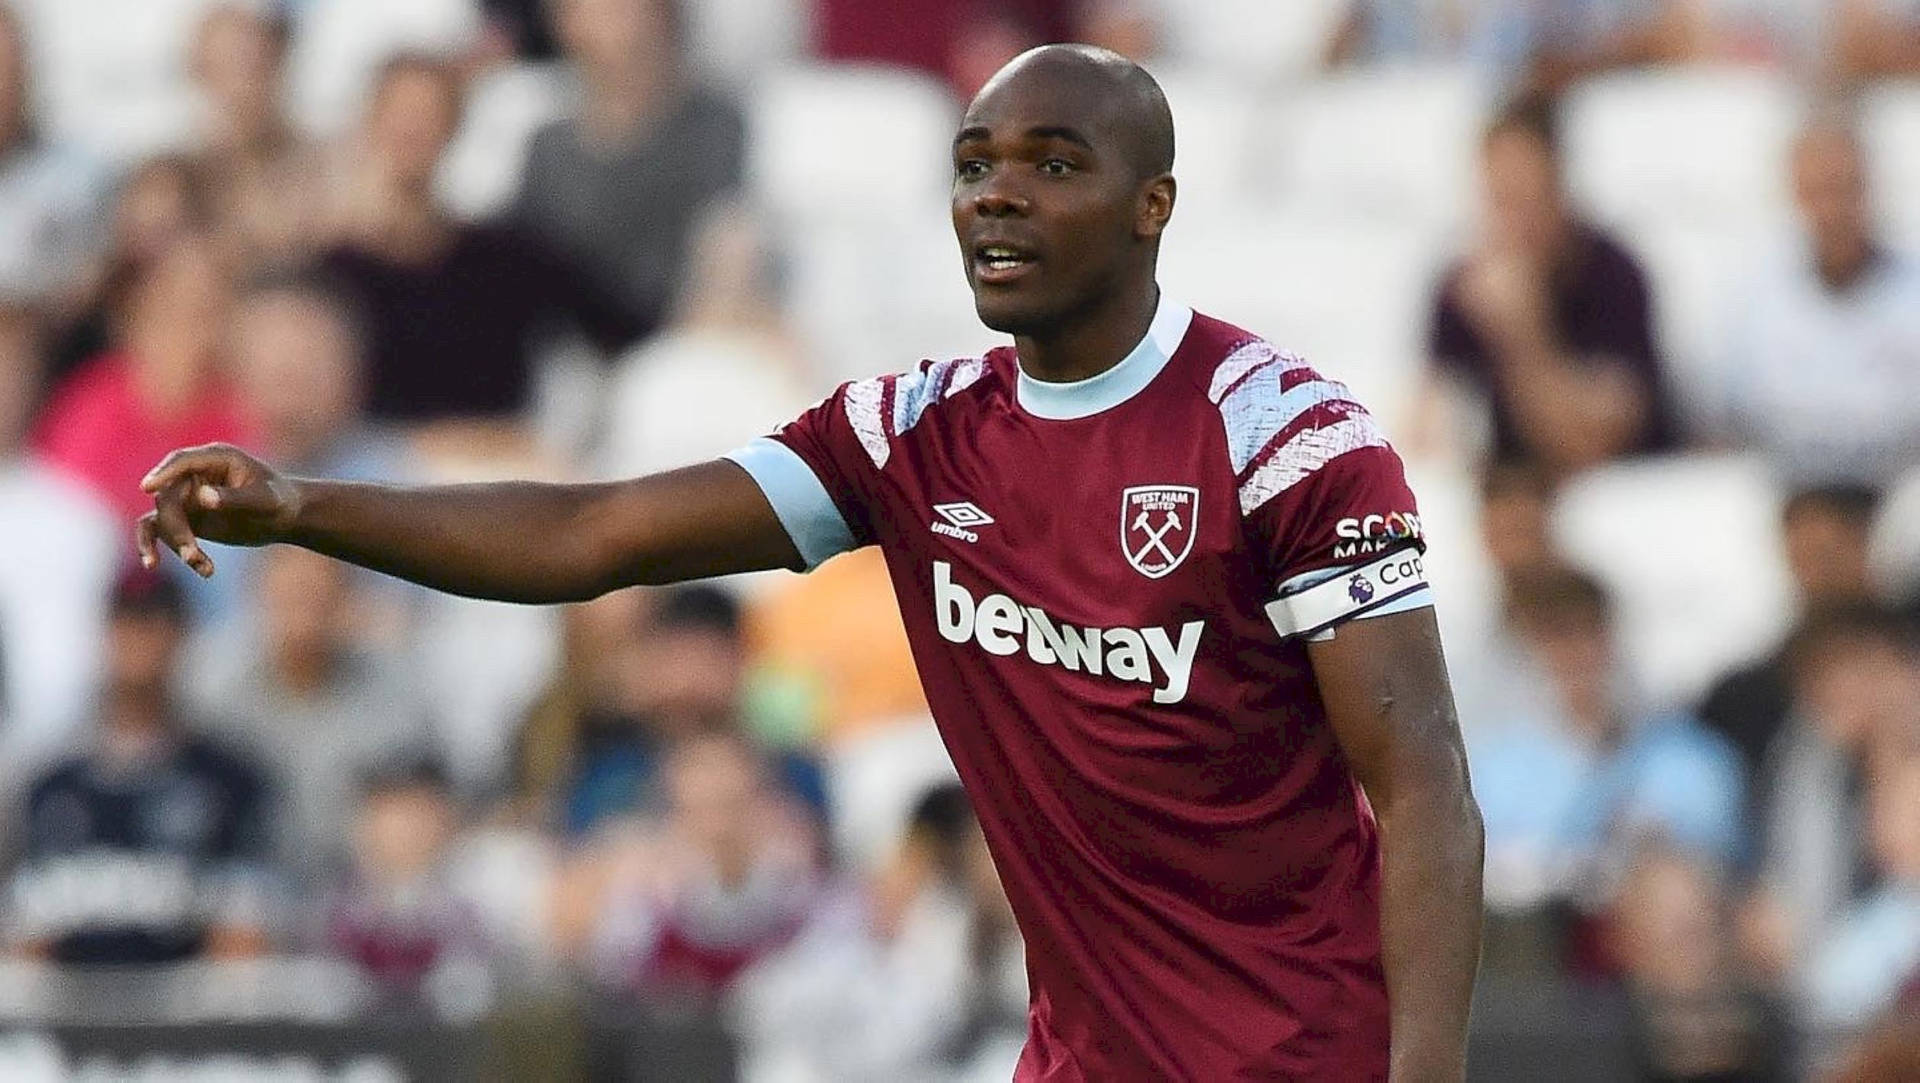 Angelo Ogbonna: A Force On The Field Wallpaper